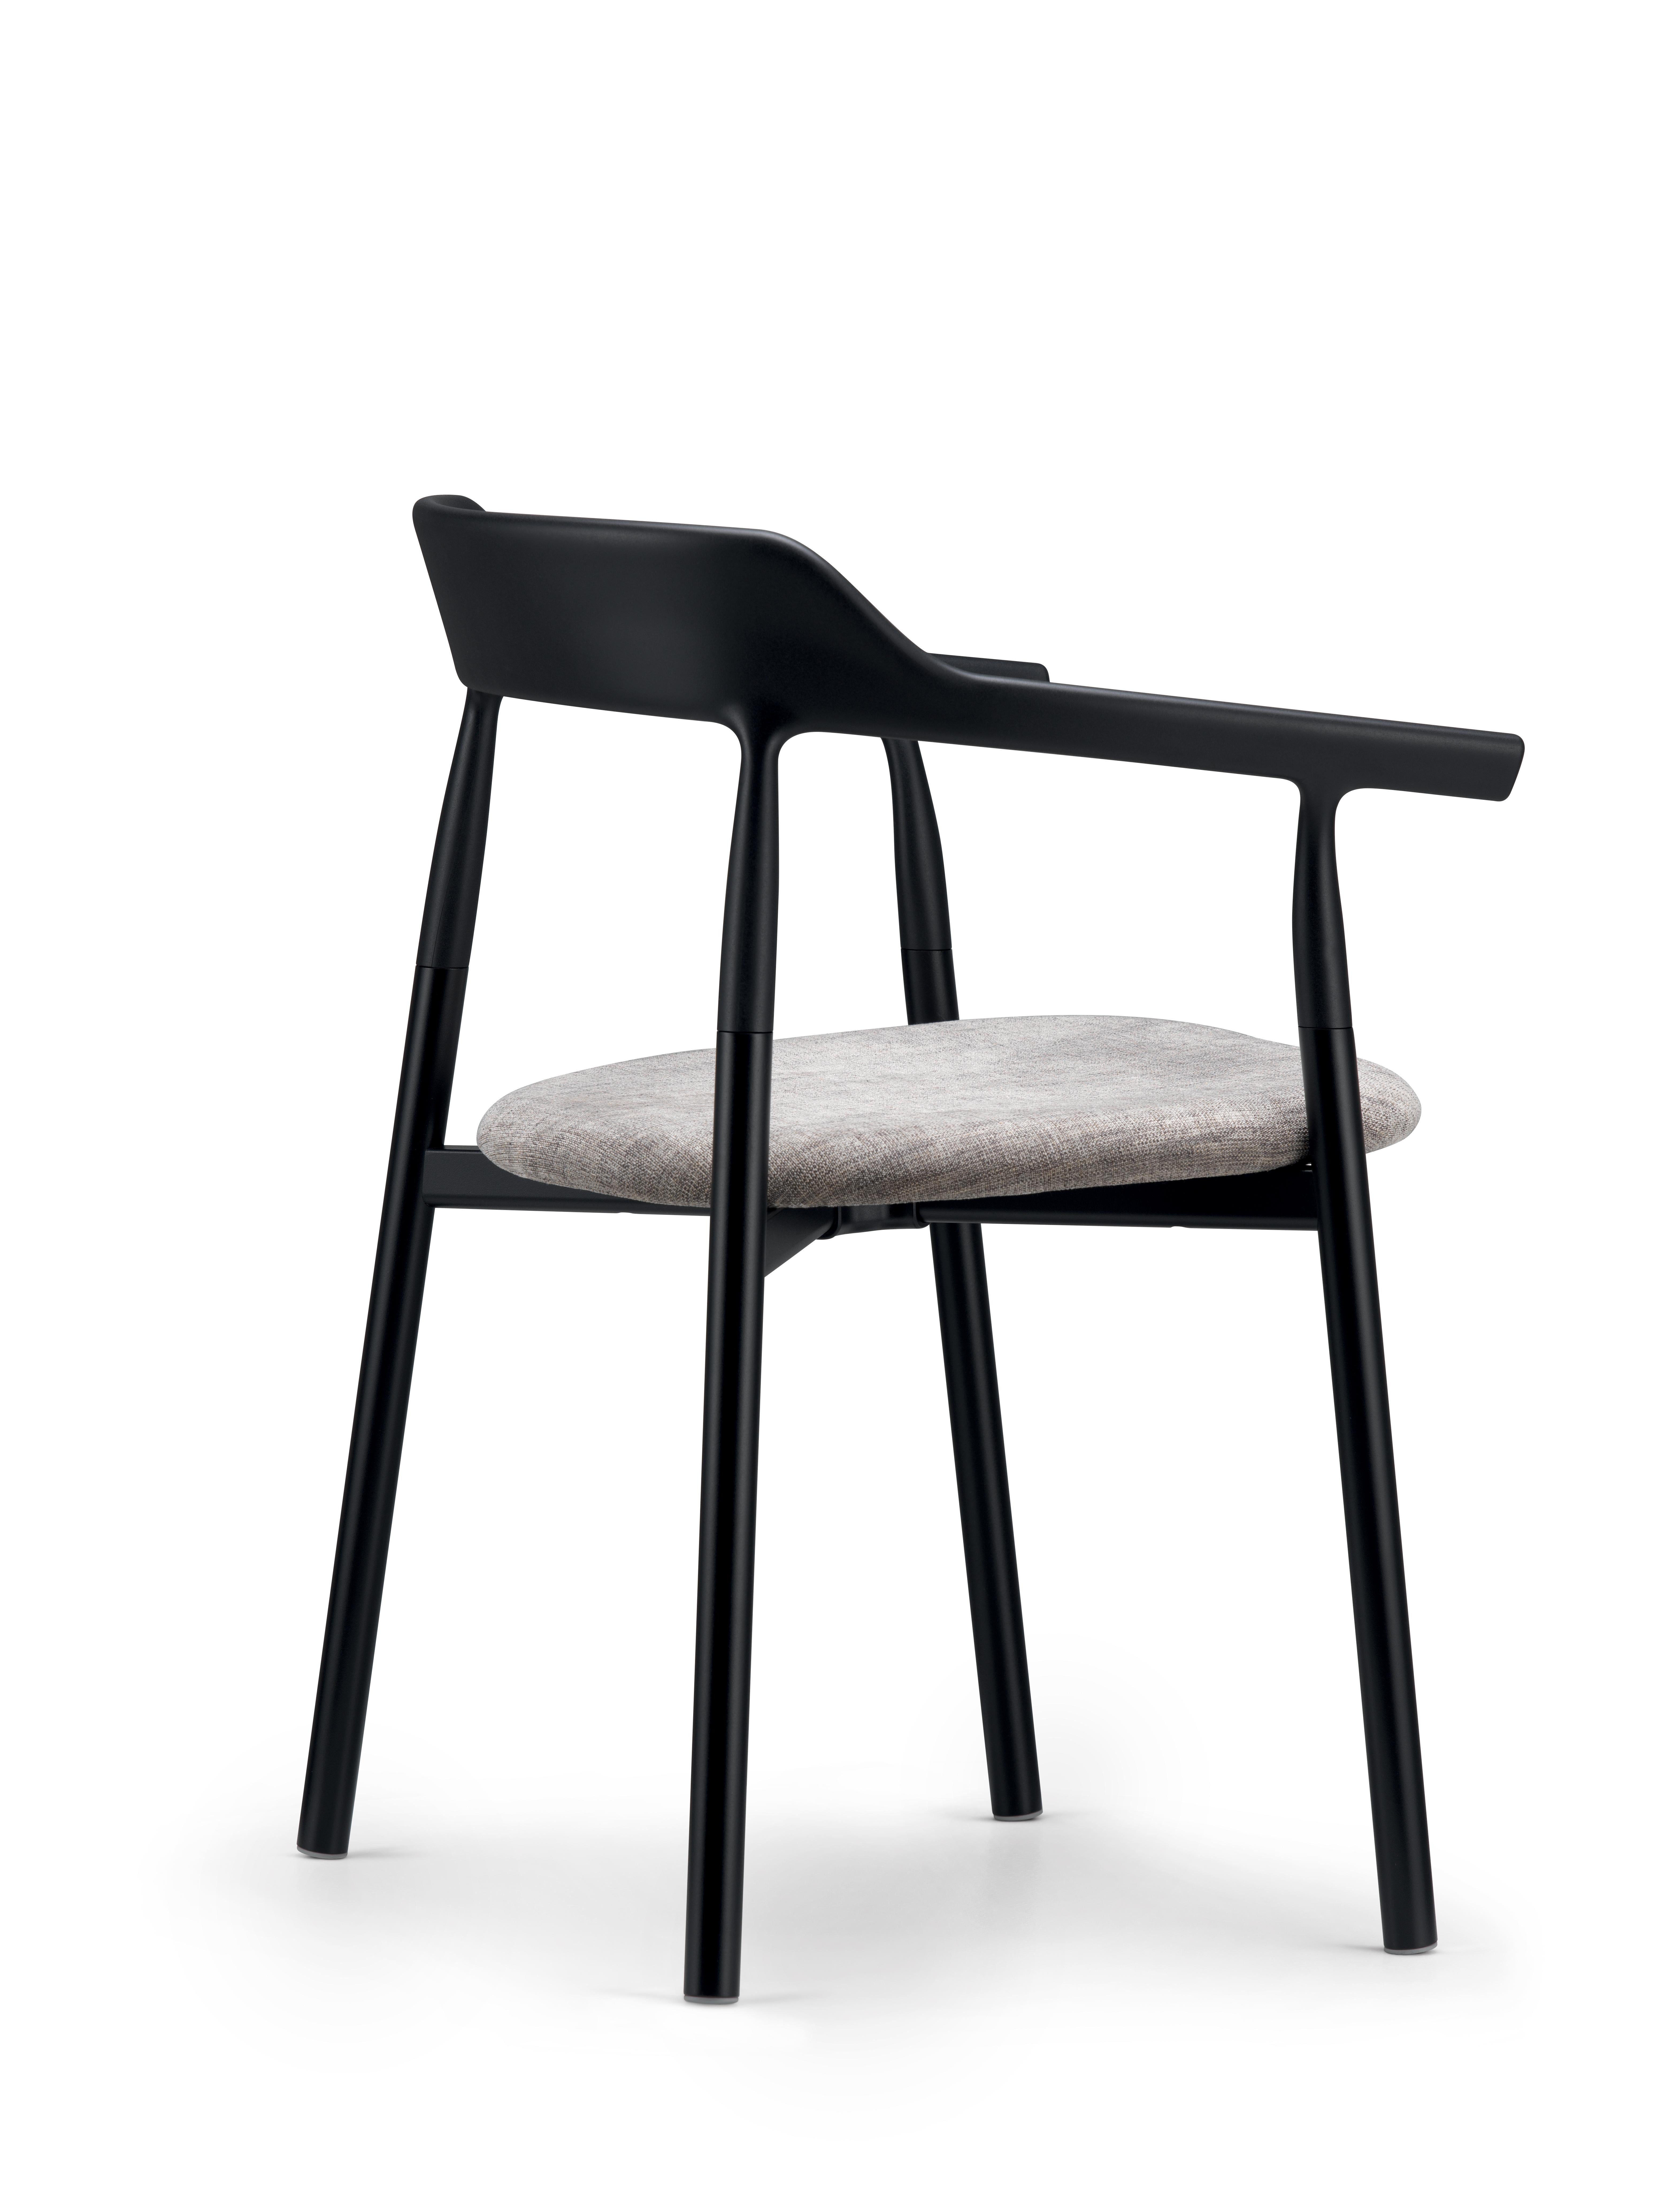 Alias 10E Twig Comfort Chair in Brown Upholstery and Black Lacquered Steel Frame by Nendo

Chair with structure in lacquered steel; back in solid lacquered plastic material; seat in solid plastic material lacquered or upholstered with fabric or